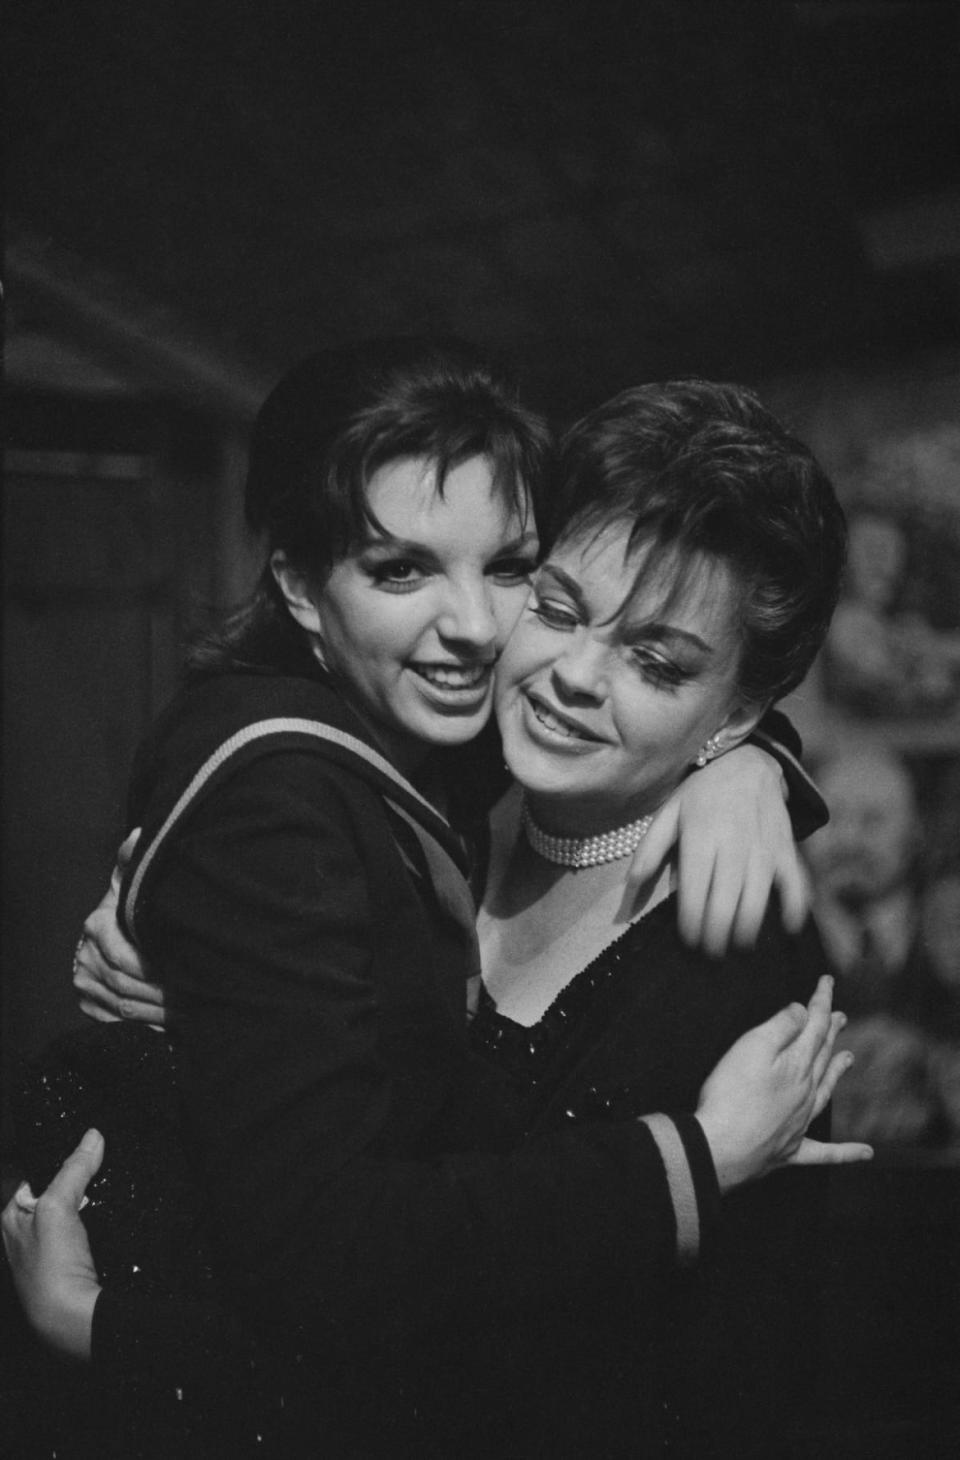 <div class="inline-image__caption"><p>Liza Minnelli with her mother, Judy Garland, backstage after she opened in 'Flora the Red Menace' at the Alvin Theatre, New York, May 11, 1965.</p></div> <div class="inline-image__credit">Regan/Daily Express/Hulton Archive/Getty</div>